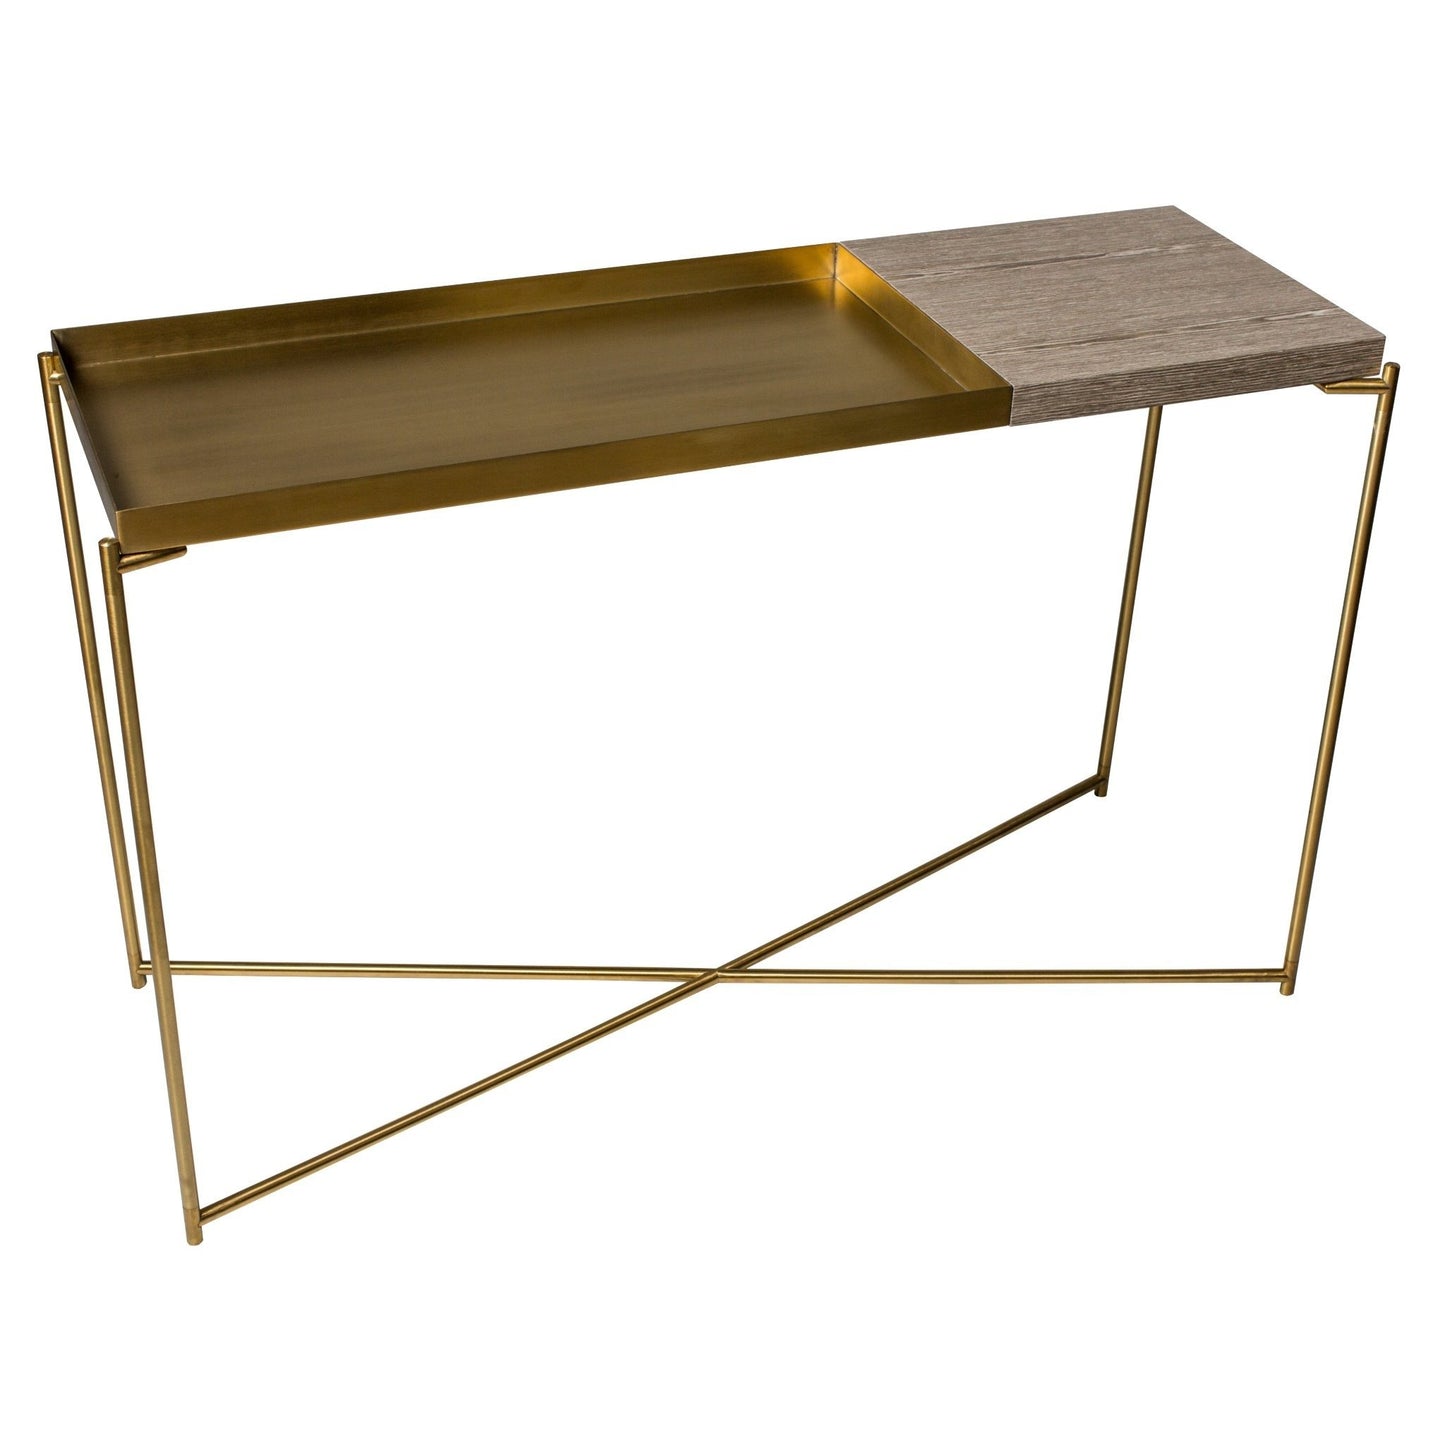 Iris Large Console Table With Large Tray Top - Small Weathered Oak Top & Brass Tray, Brass Frame